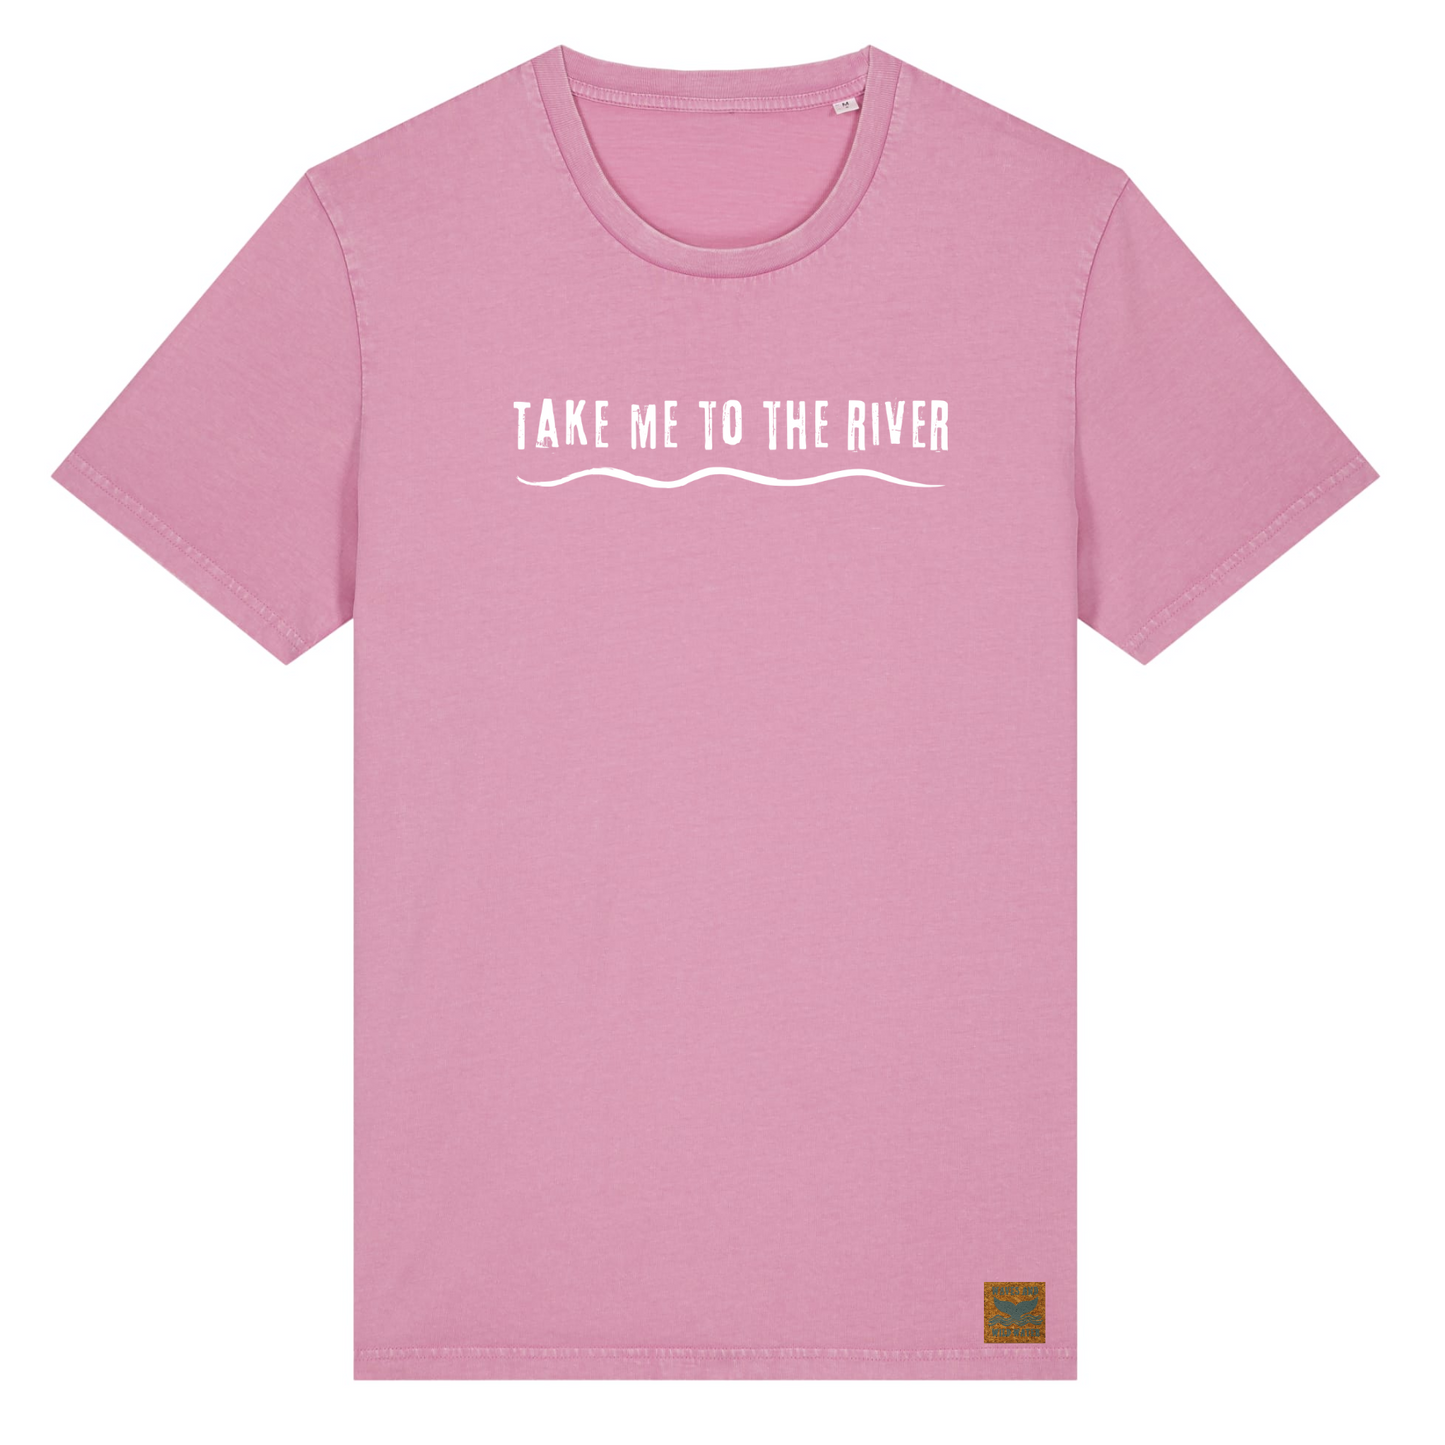 The a pink t-shirt with white text print on the front